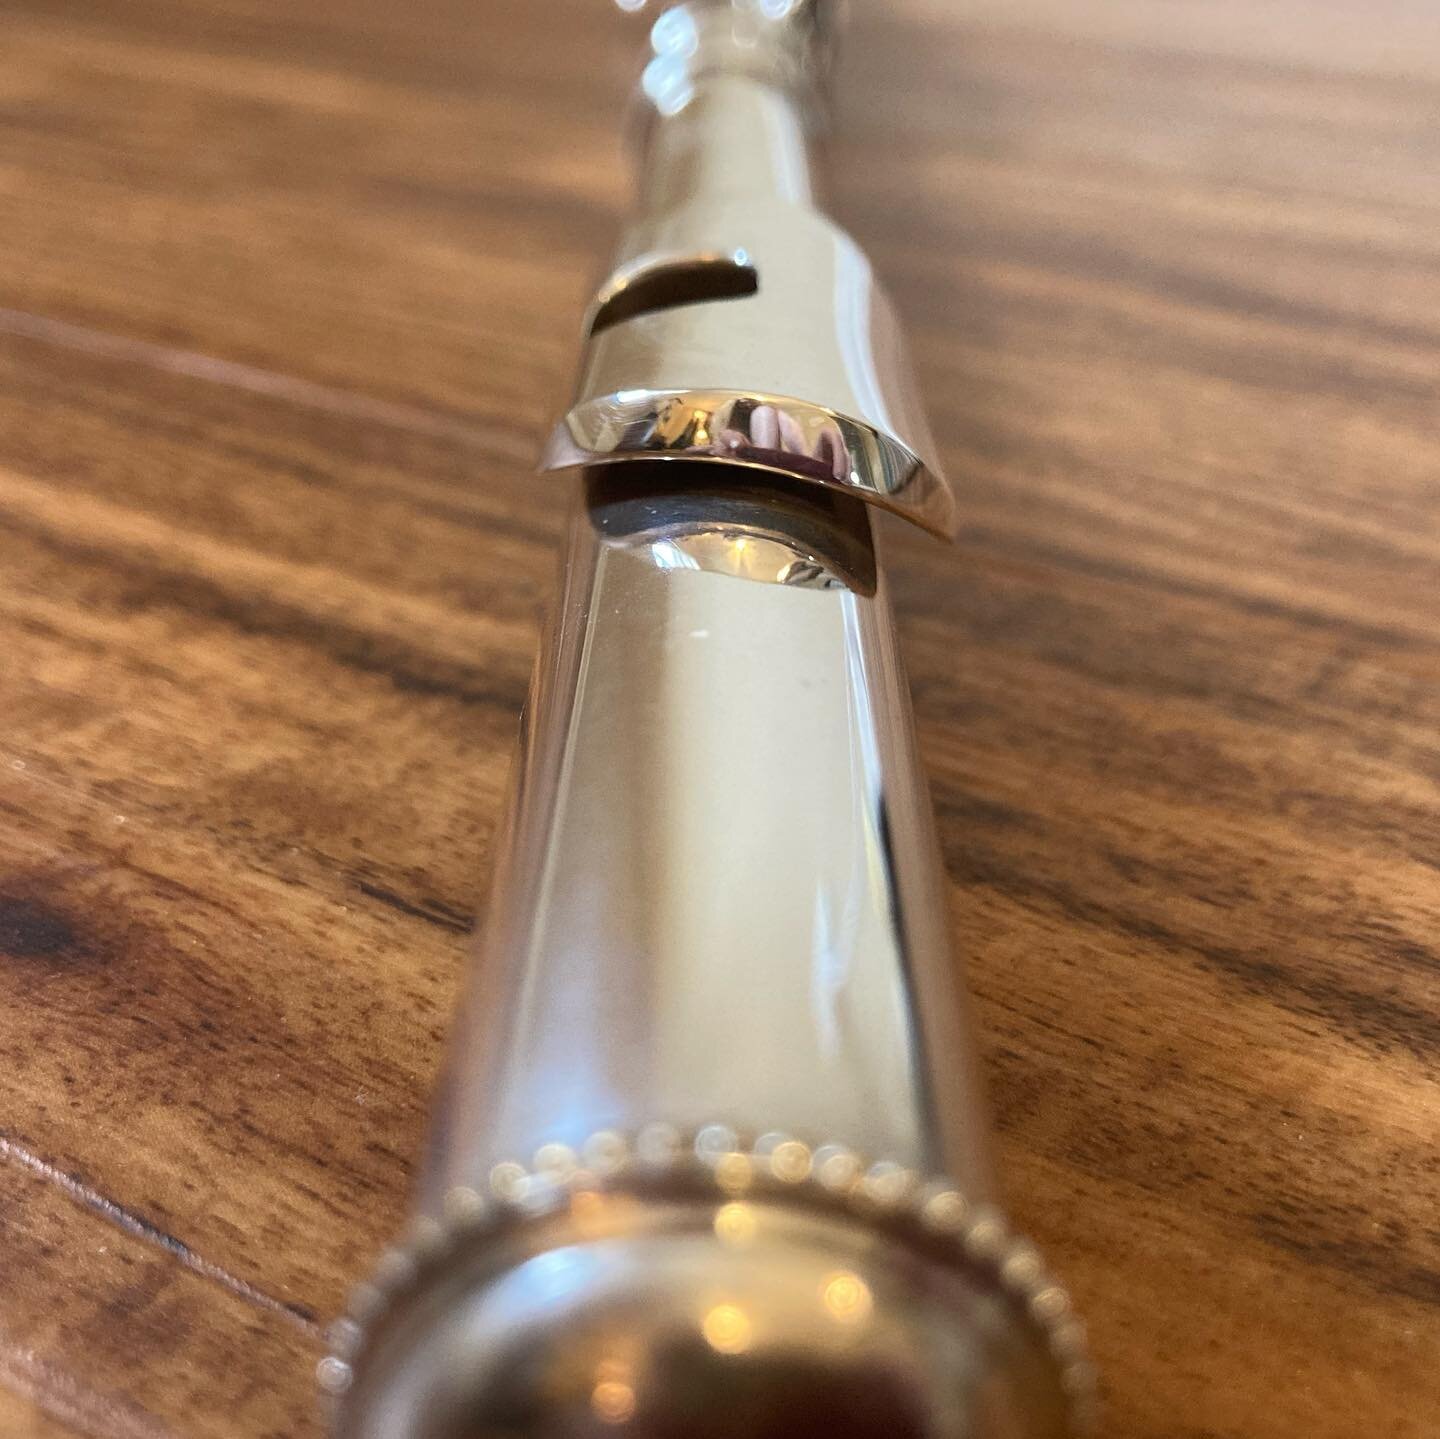 The place where the magic happens ✨ The headjoint features a lip plate with an embouchure hole in it. The edge of the embouchure hole that flutists blow a stream of air against is called the &ldquo;strike edge&rdquo;. Did you know that when flutists 